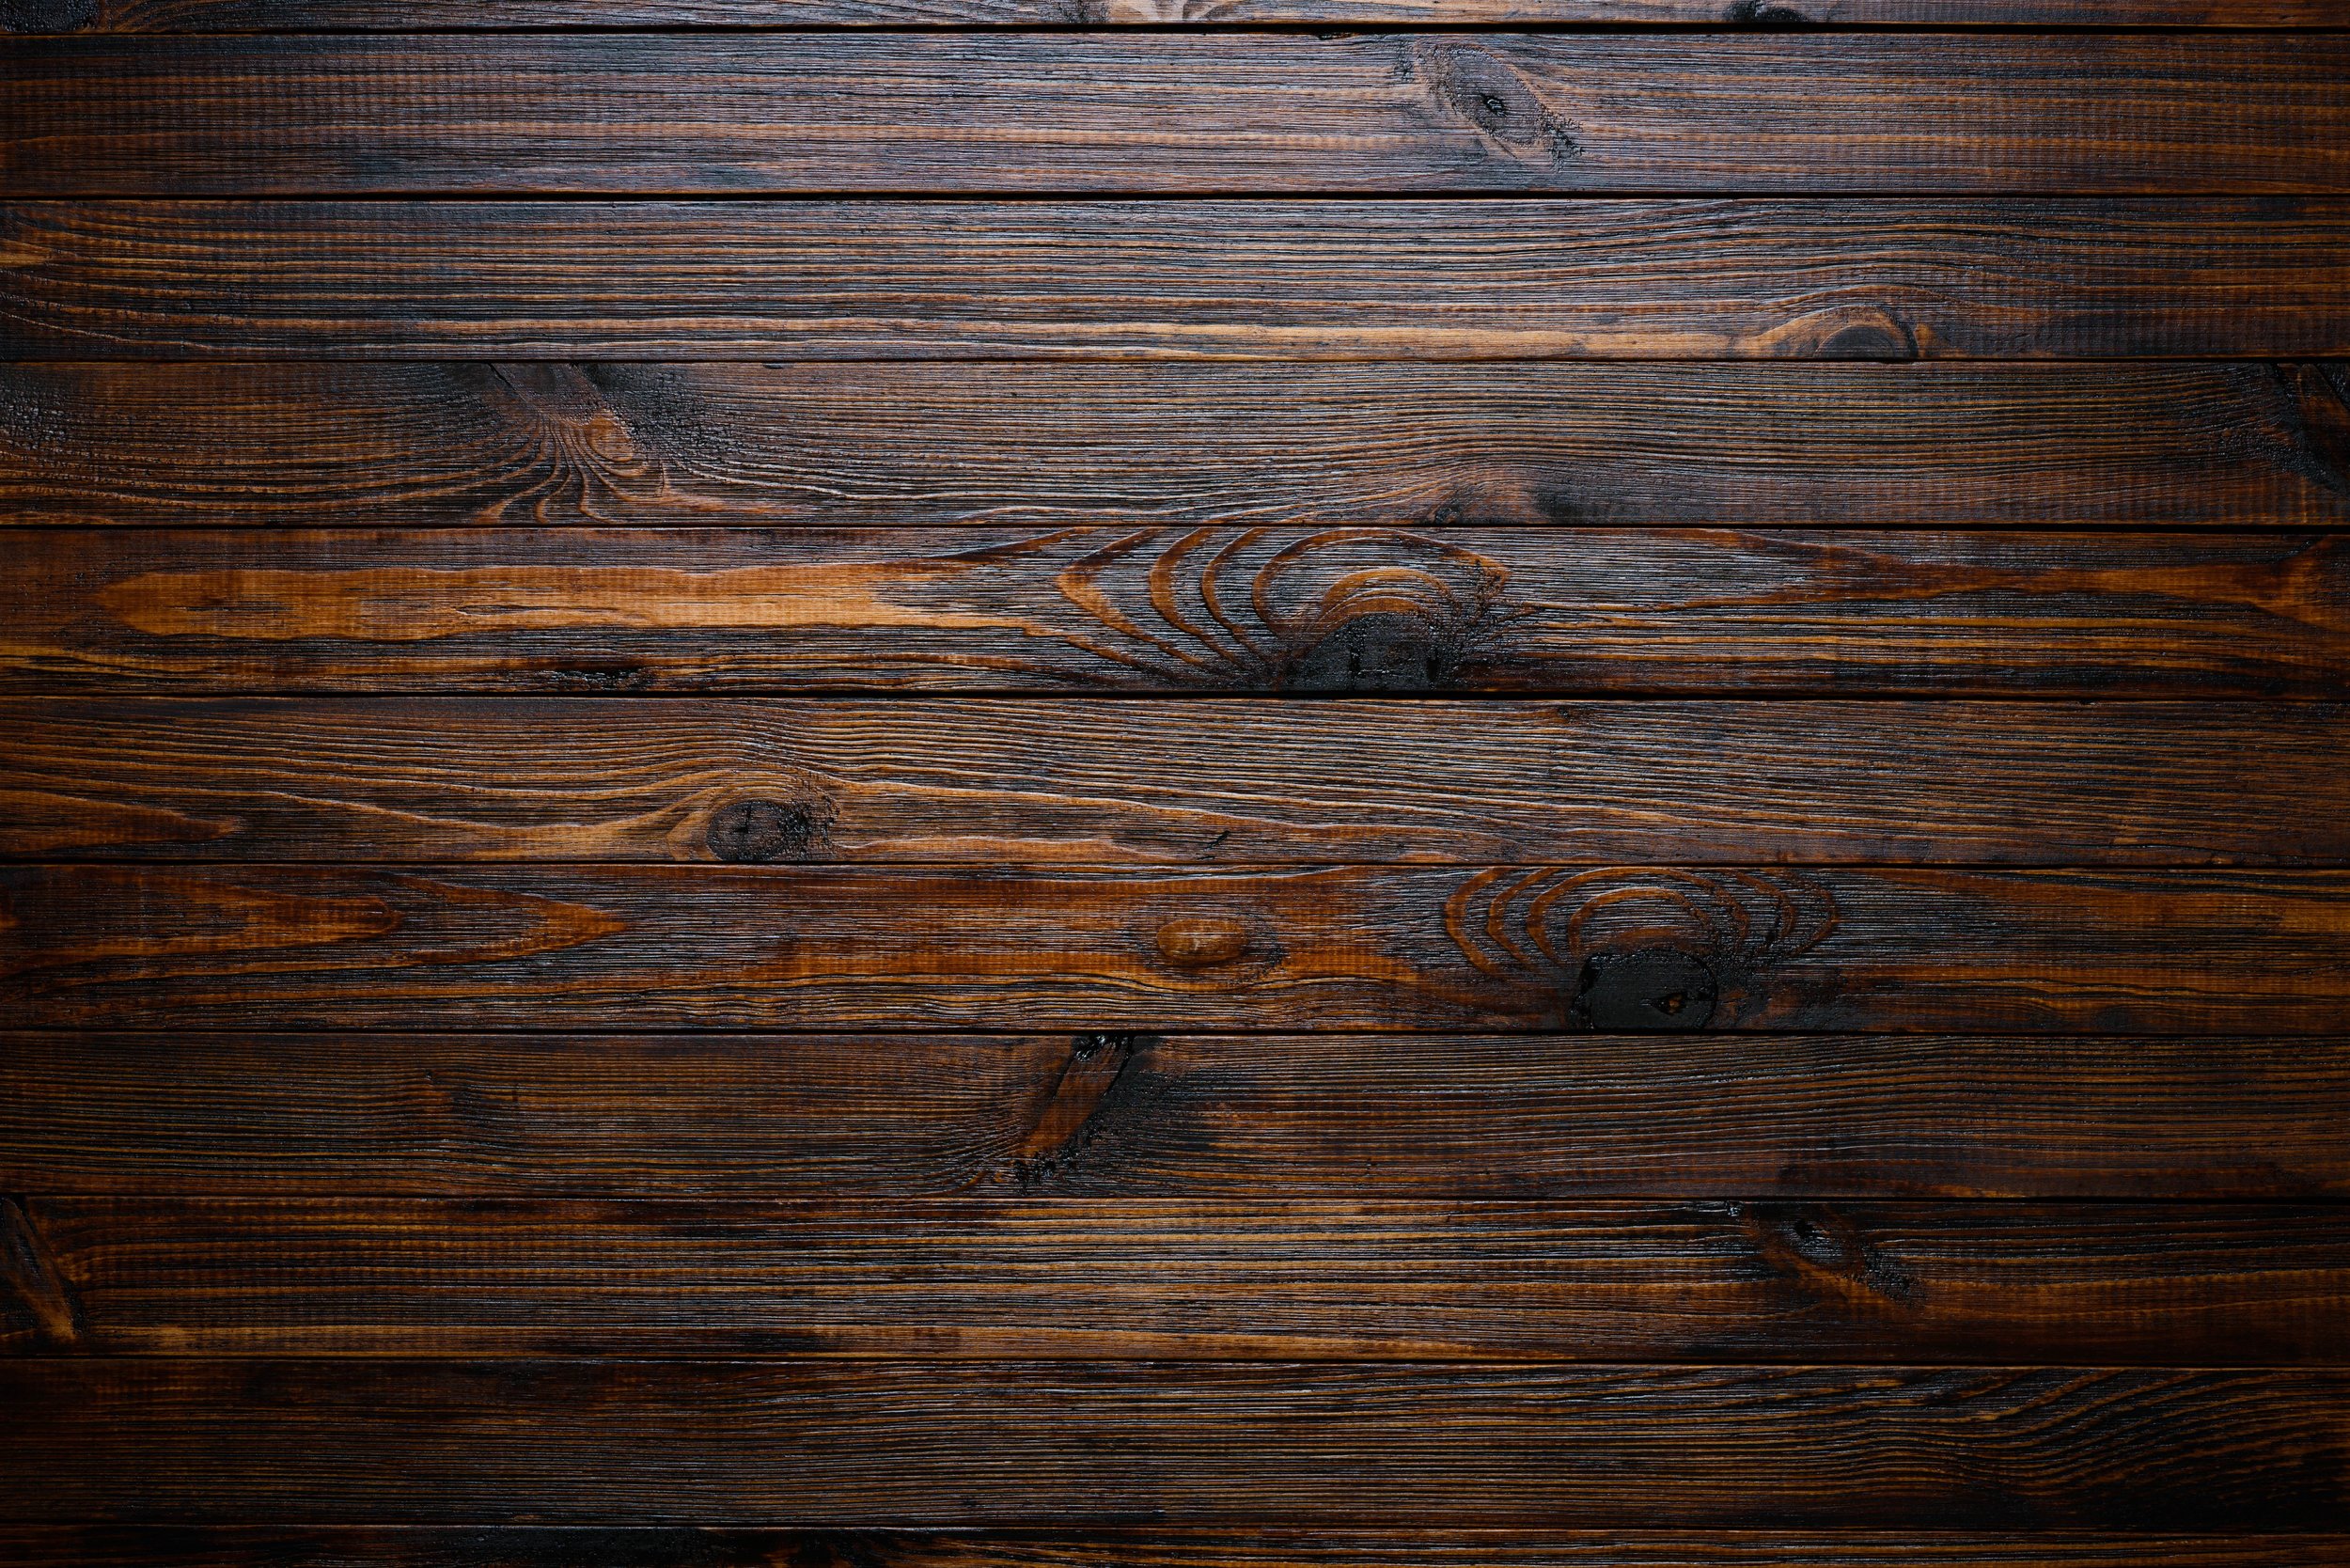 What Goes Well With Dark Wood Flooring?